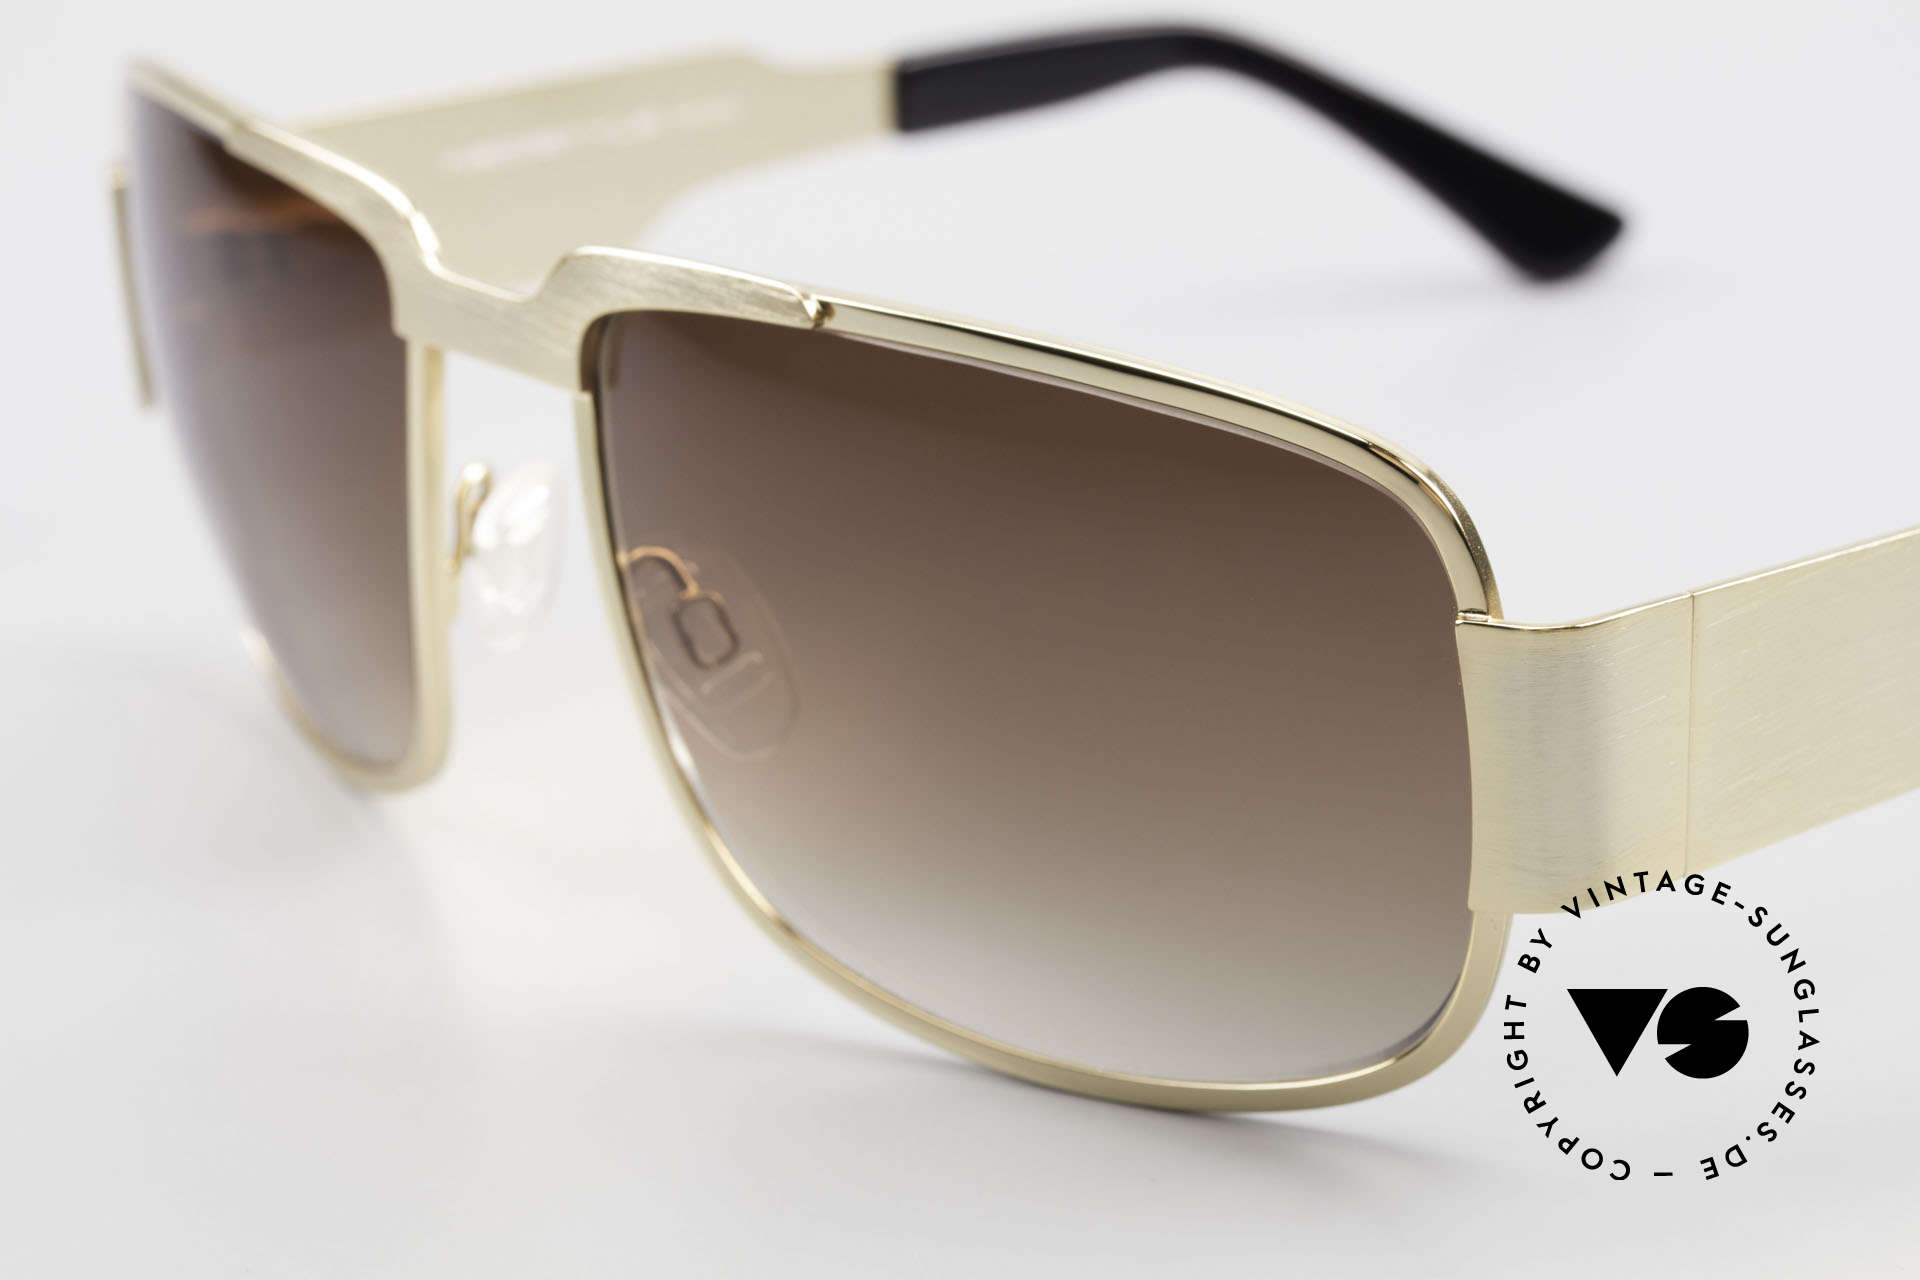 Neostyle Nautic 2 Miley Cyrus Video Sunglasses, and Brad Pitt in "Once upon a time in Hollywood", 2019, Made for Men